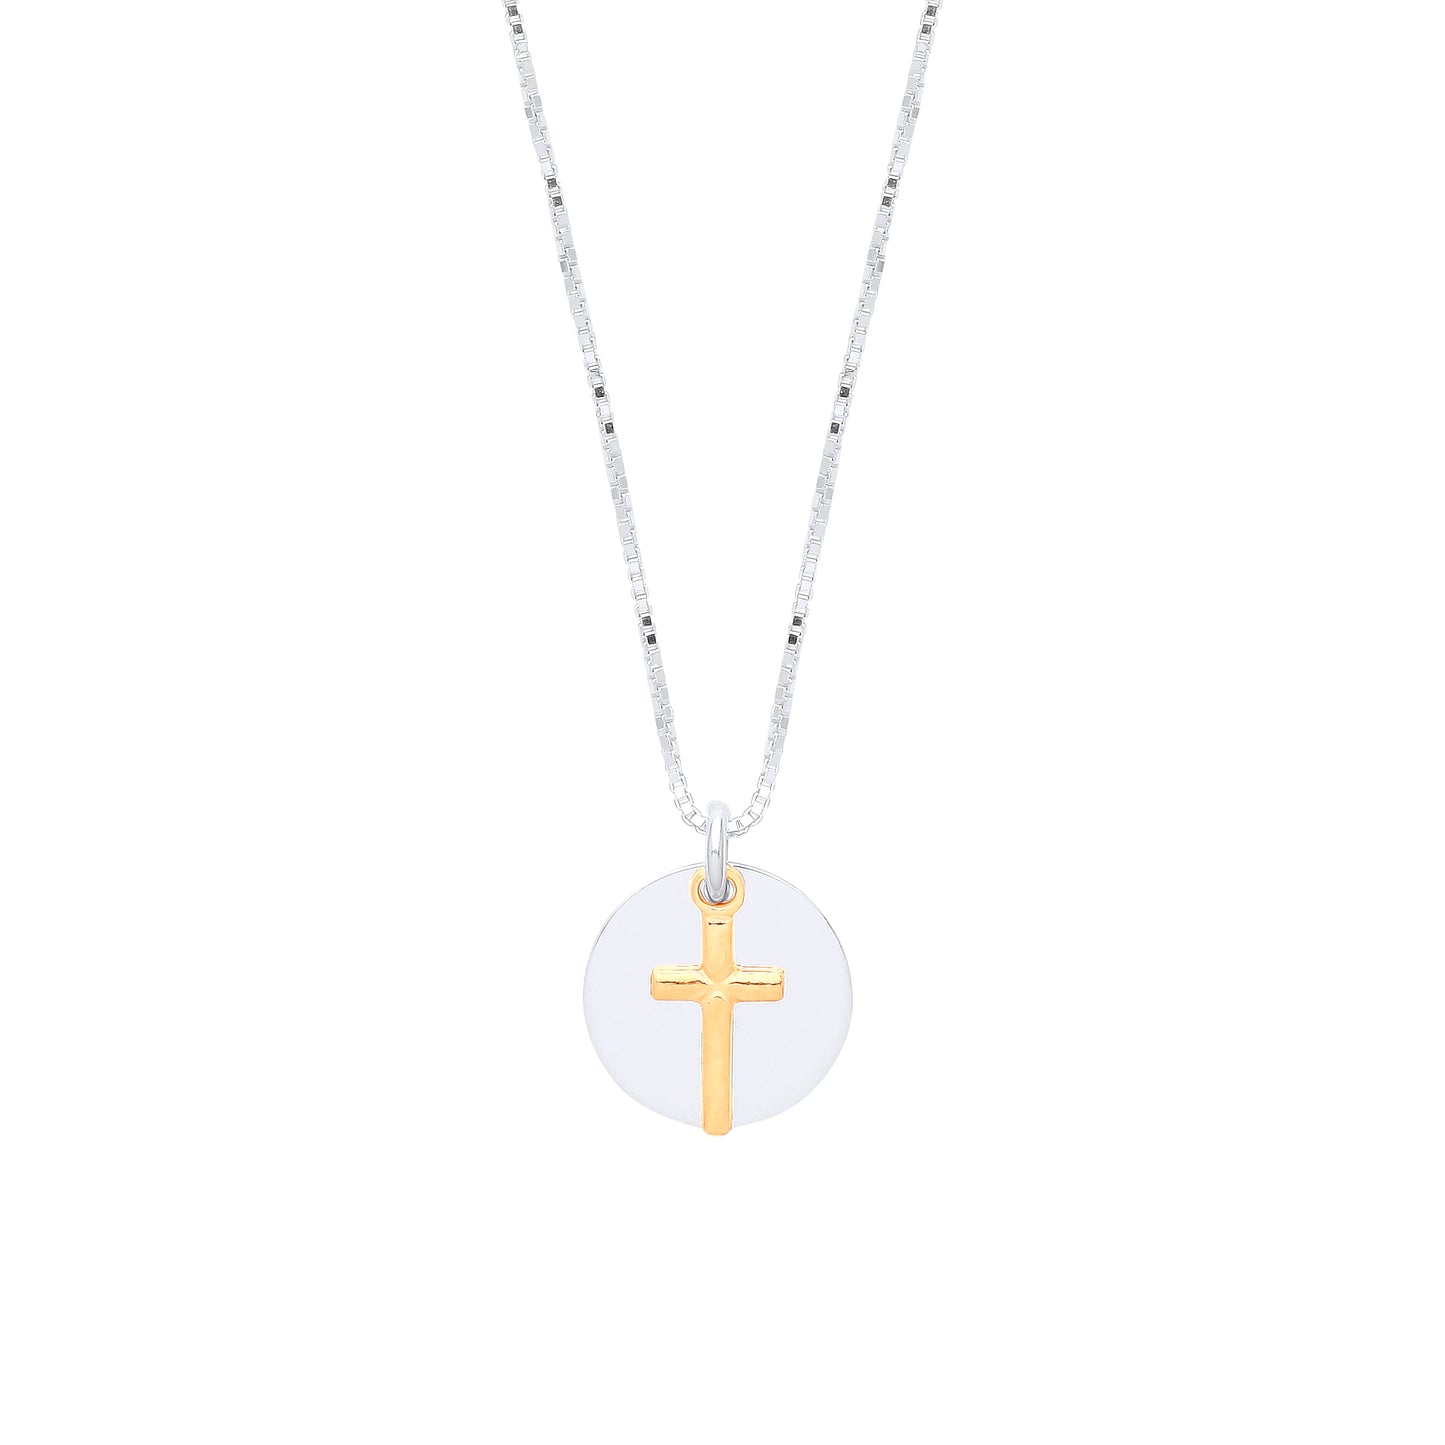 Gilded Silver  Cross Charm & Round Disc Lavalier Necklace - GVK347